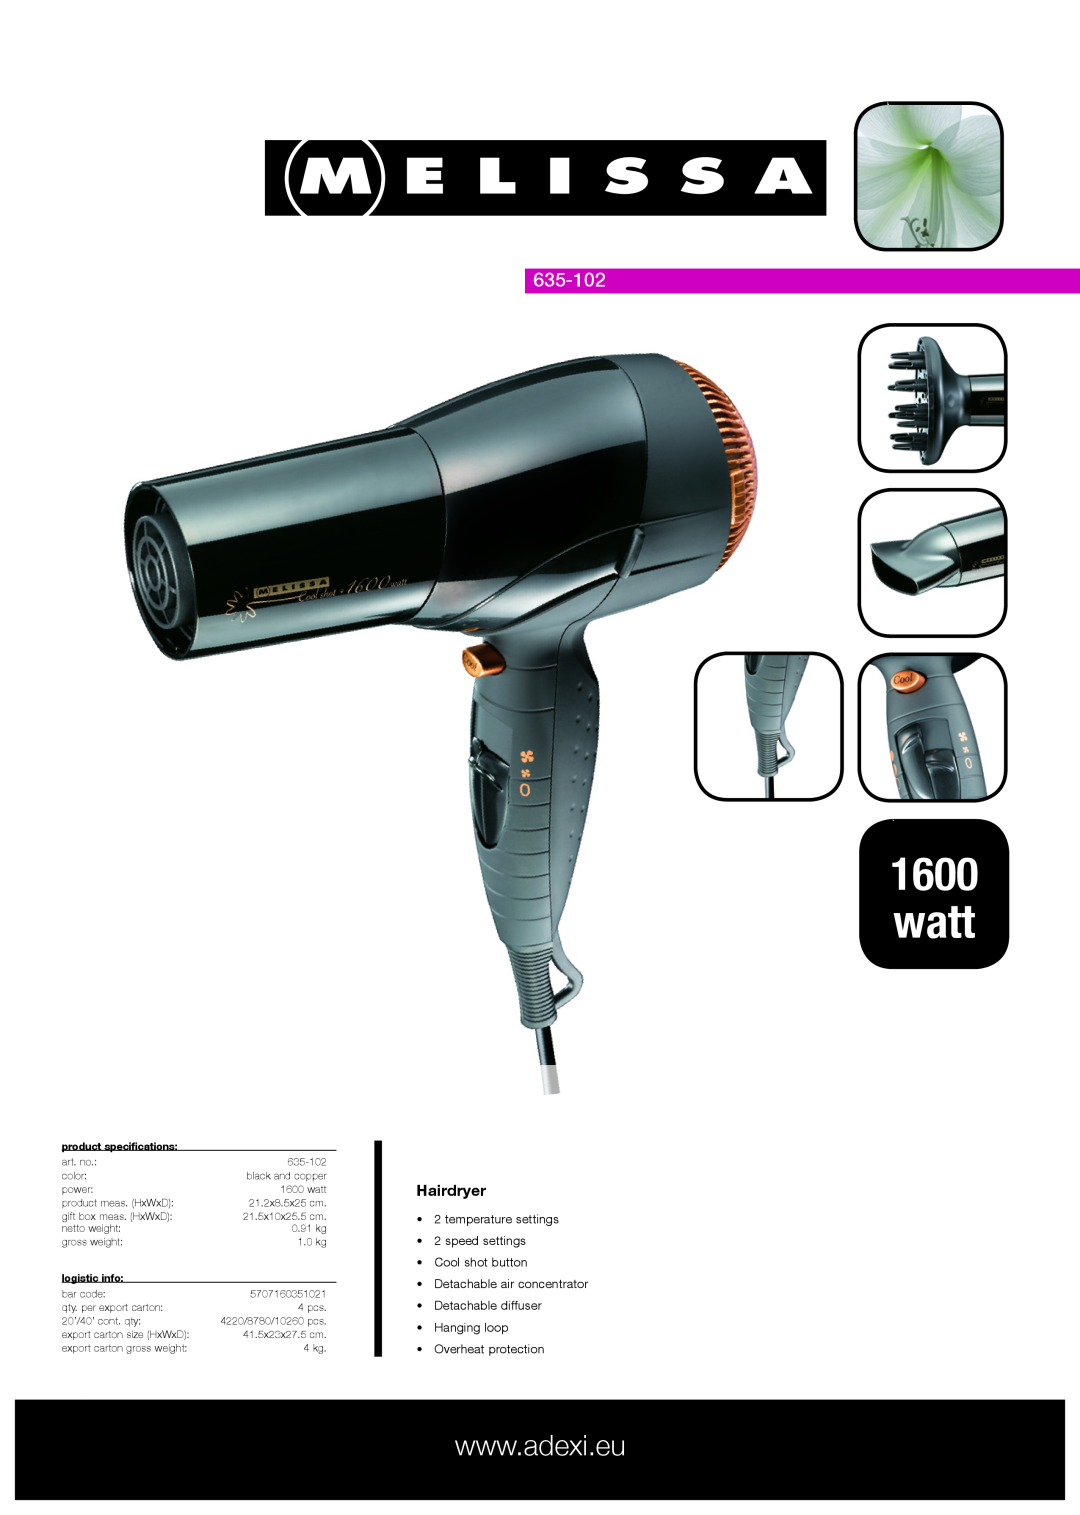 Melissa 635-102 specifications watt, Hairdryer, temperature settings 2 speed settings Cool shot button, logistic info 